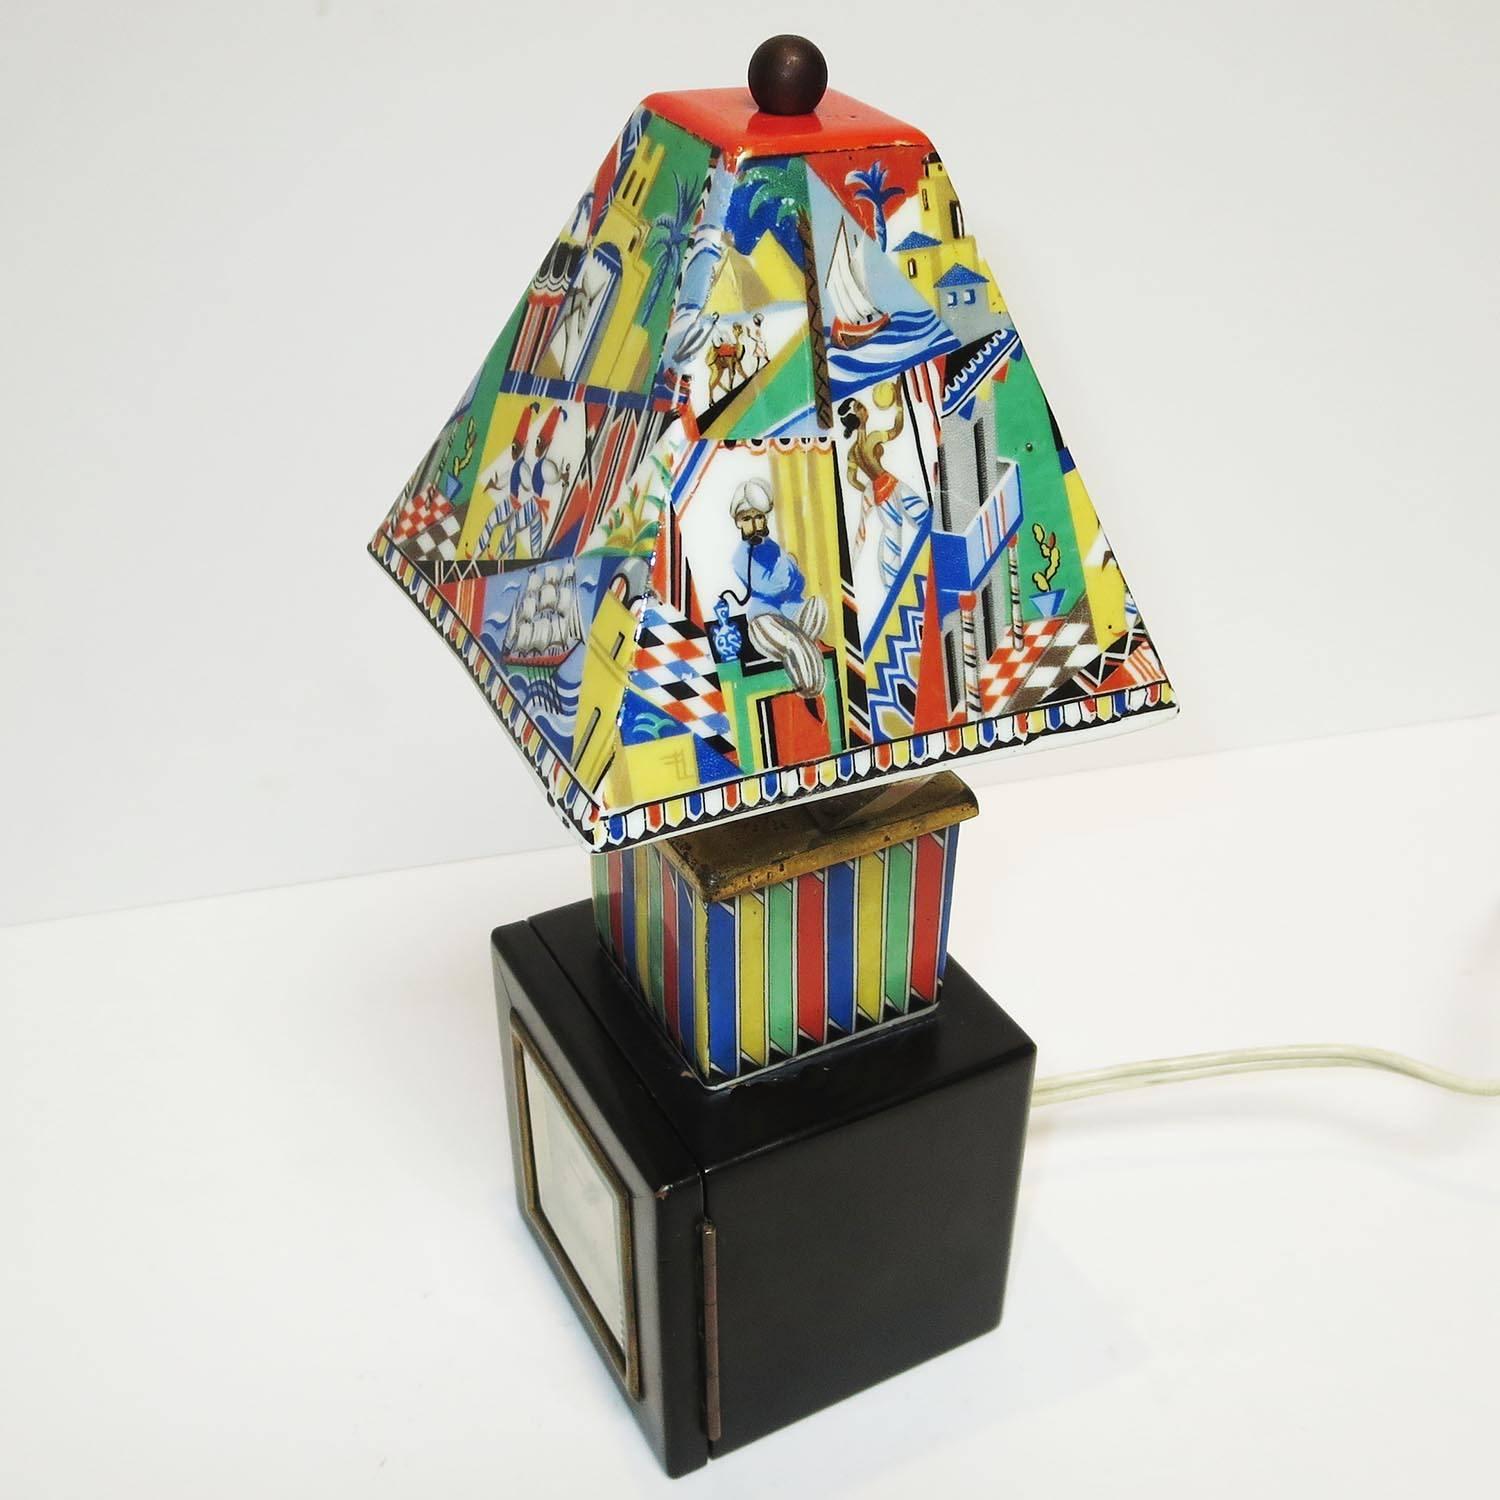 This wonderful small lamp is perfect as a bedside night light and clock, or anywhere a splash of color is needed. One is drawn to the shade, which is hand painted china, in a Moroccan theme. The color scheme is carried on in the ceramic column of